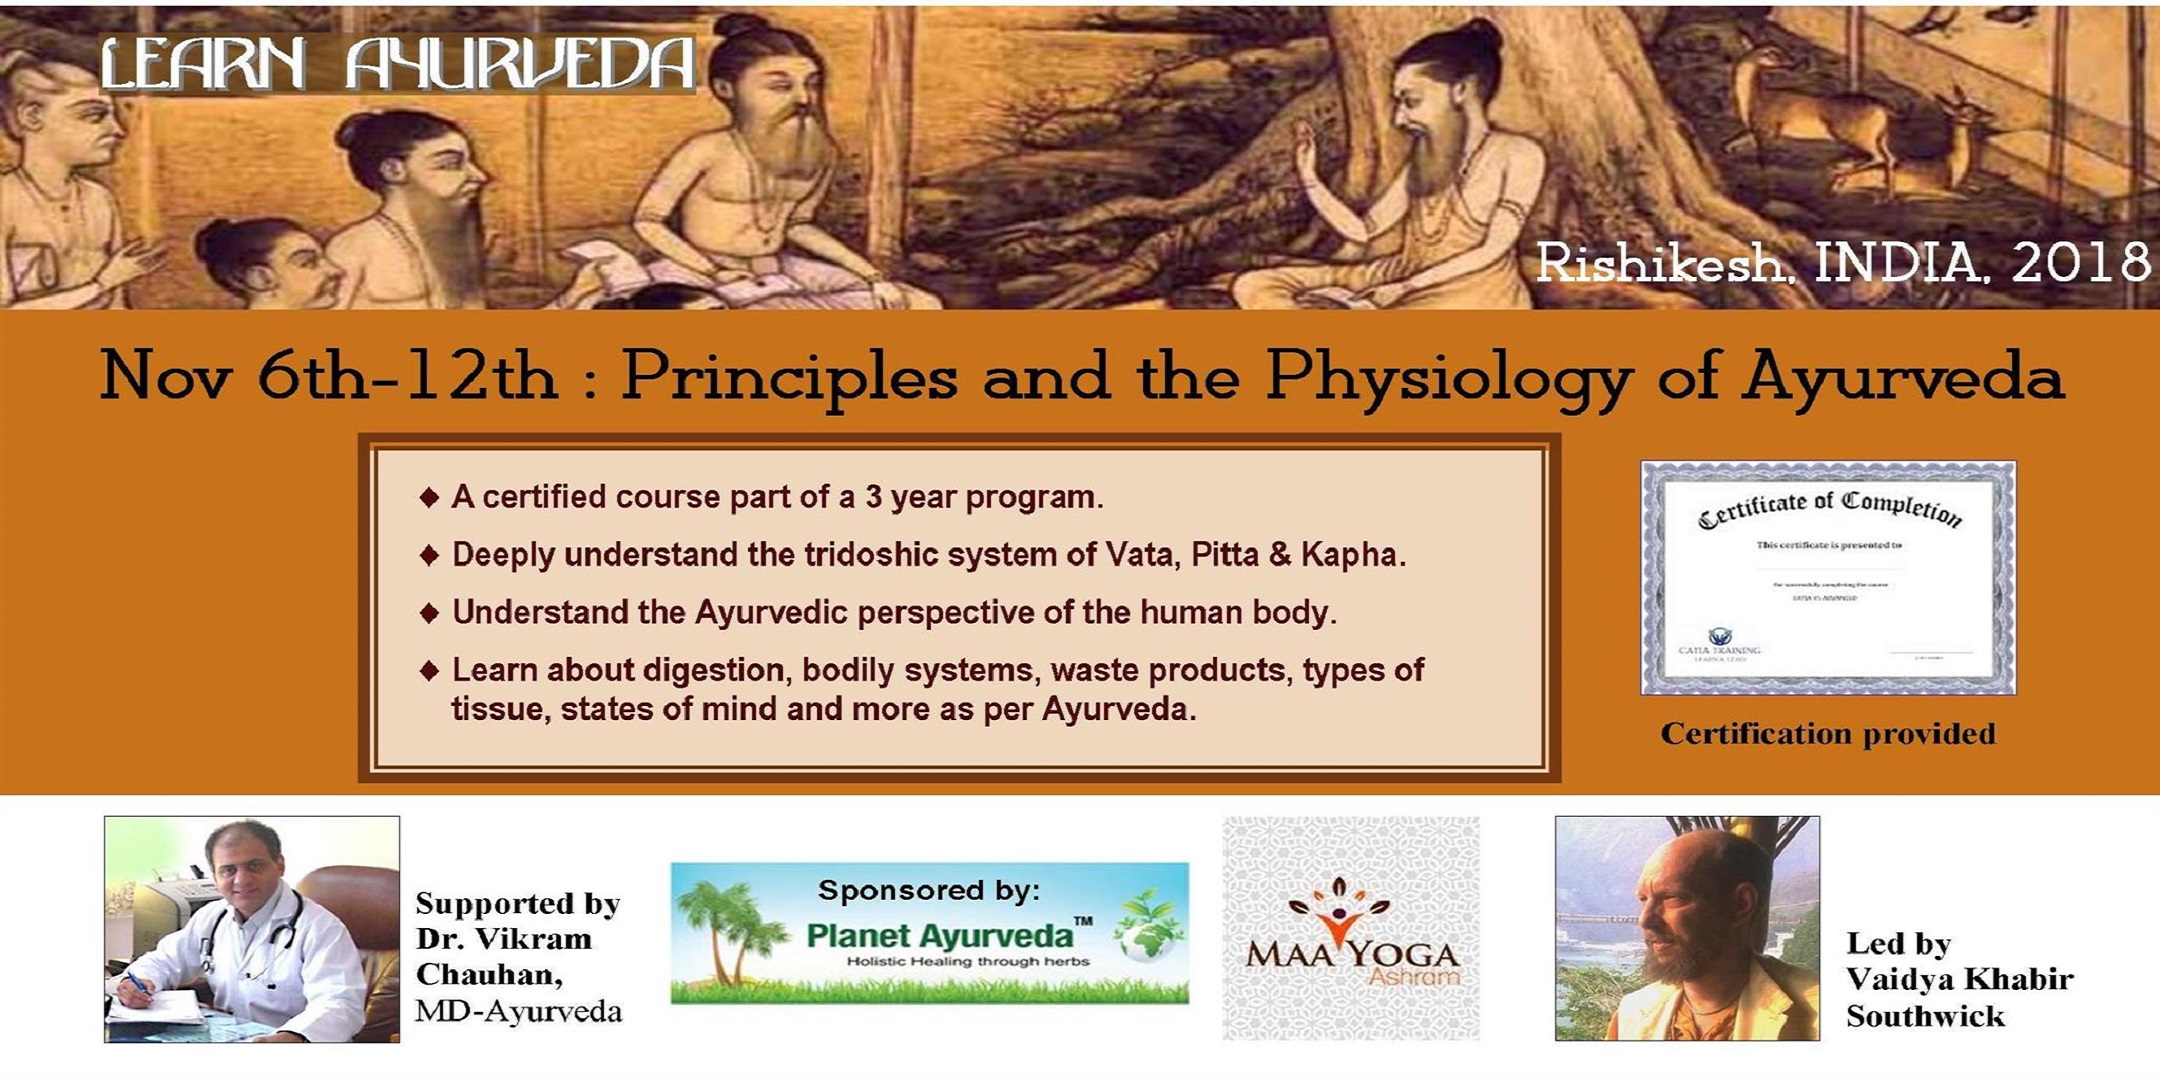 7-day course: Principles and the Physiology of Ayurveda